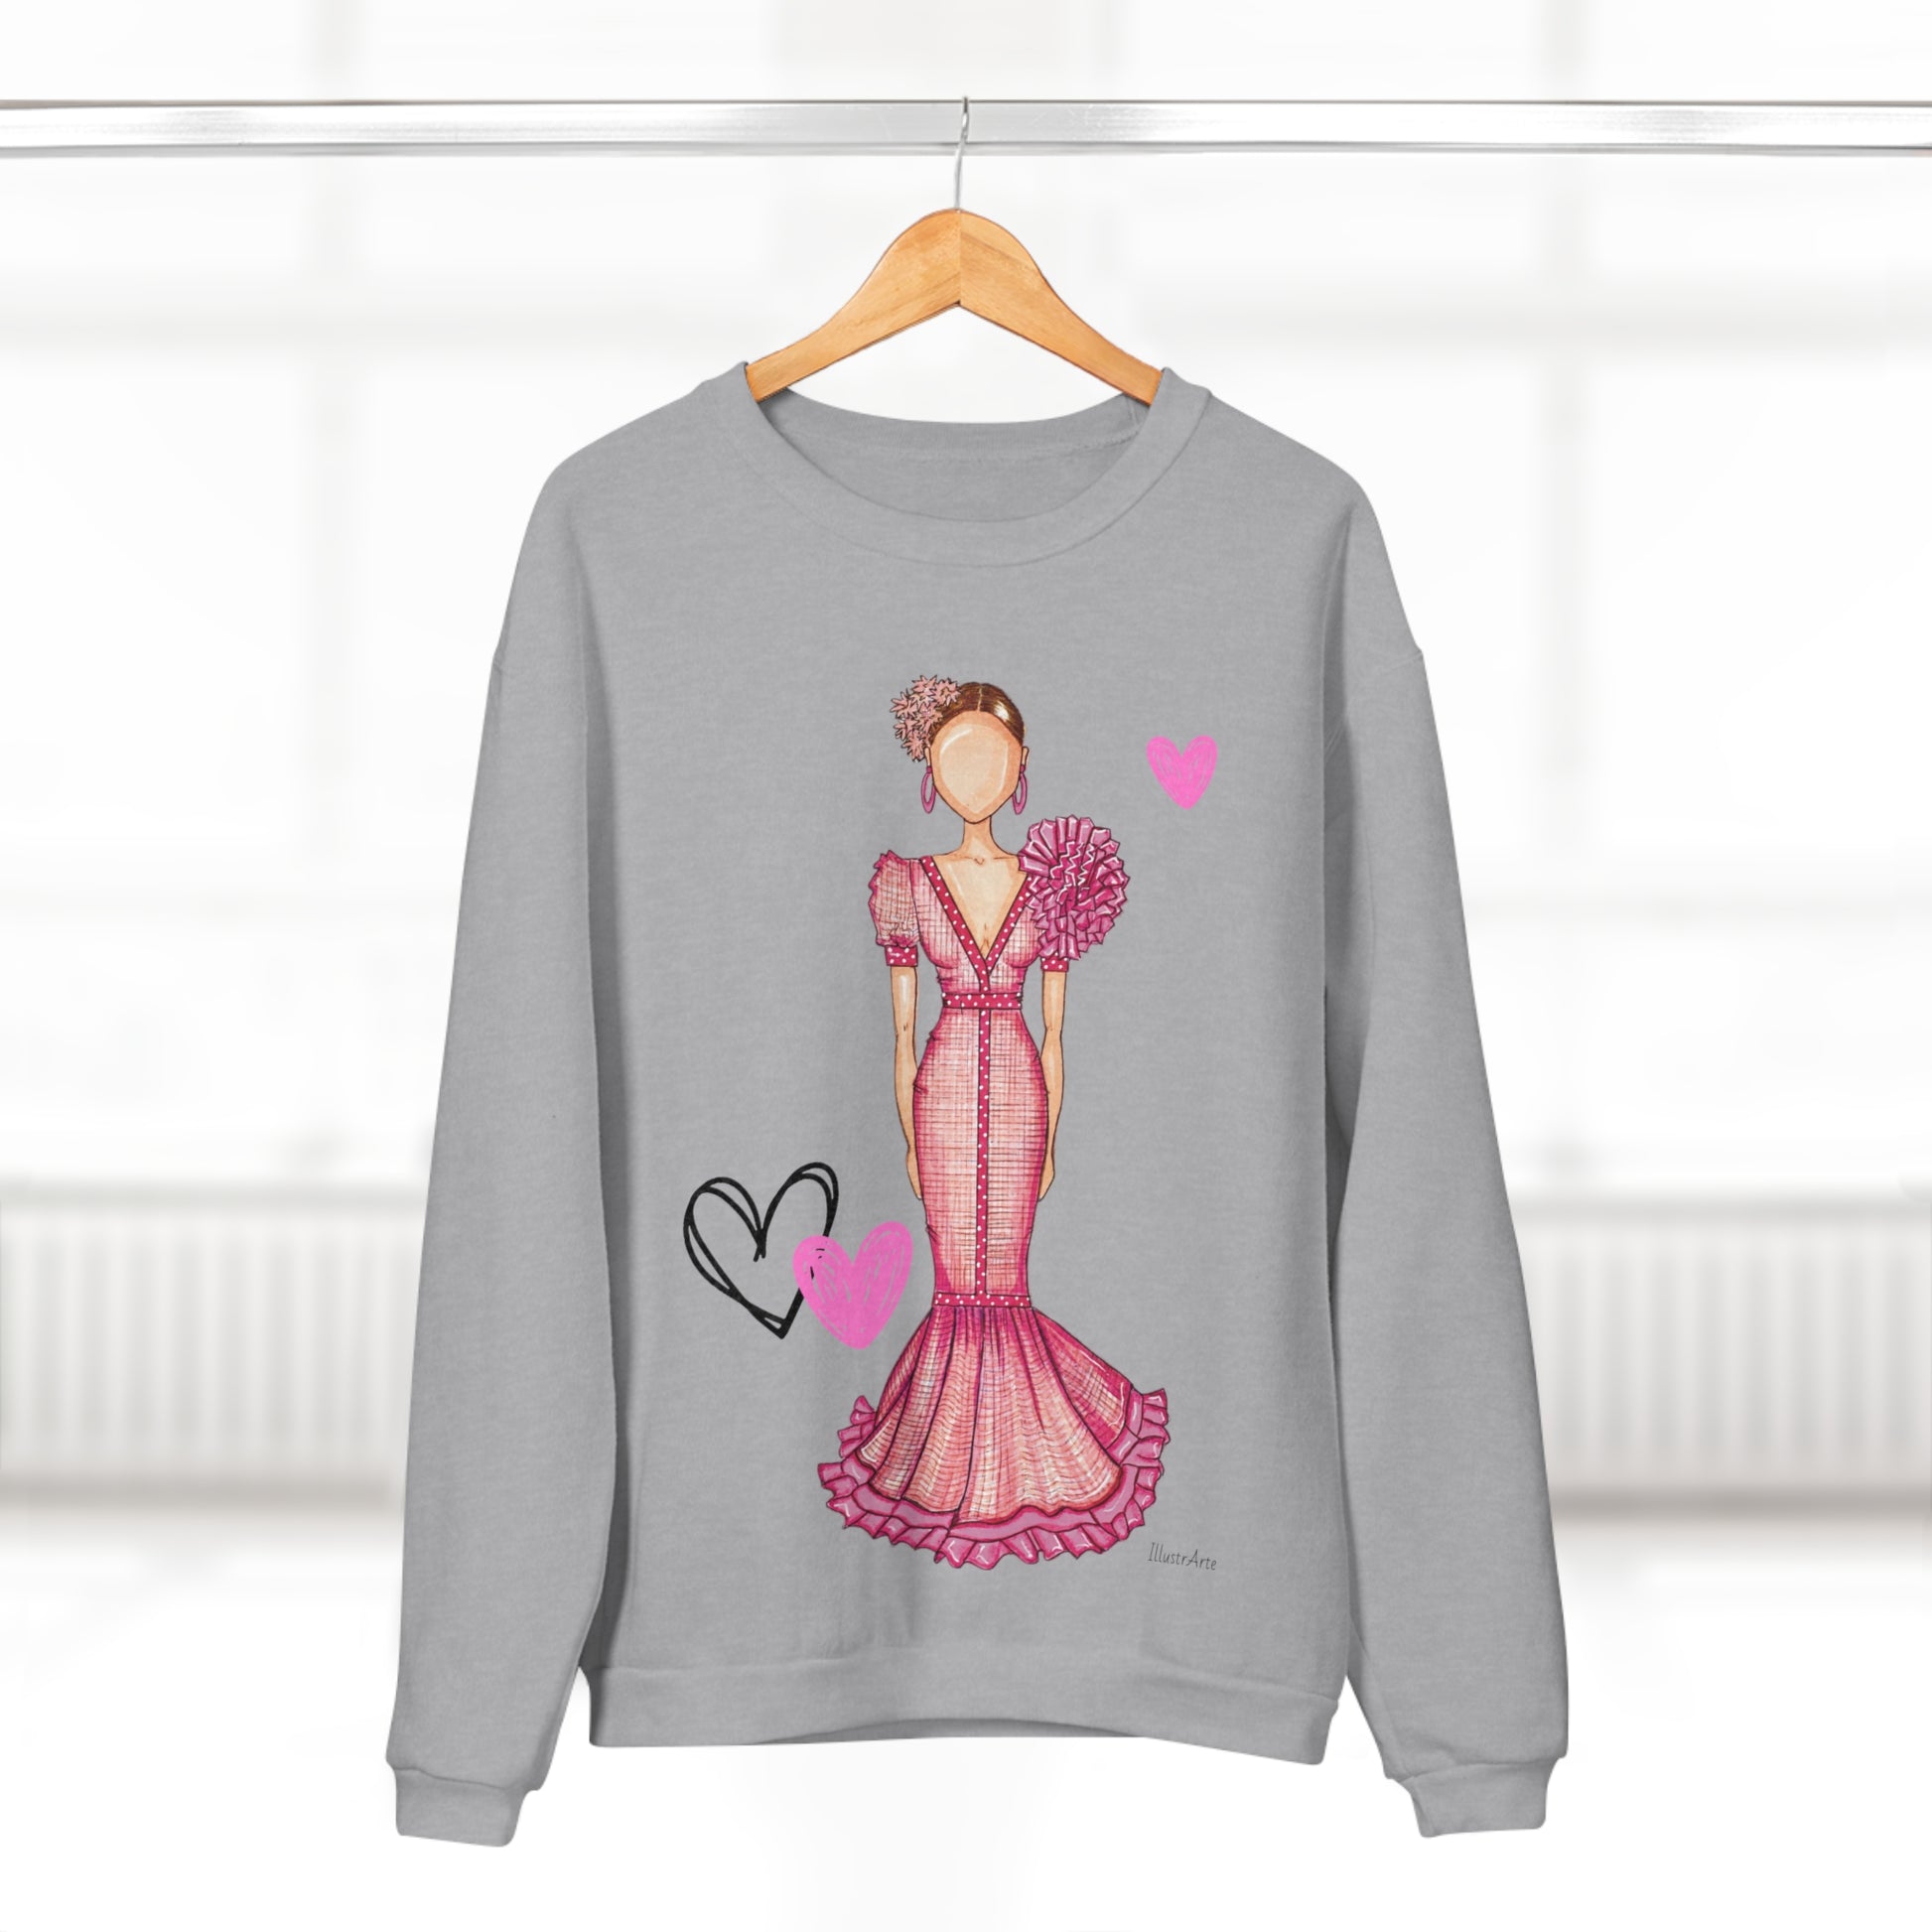 a sweater with a drawing of a woman in a pink dress